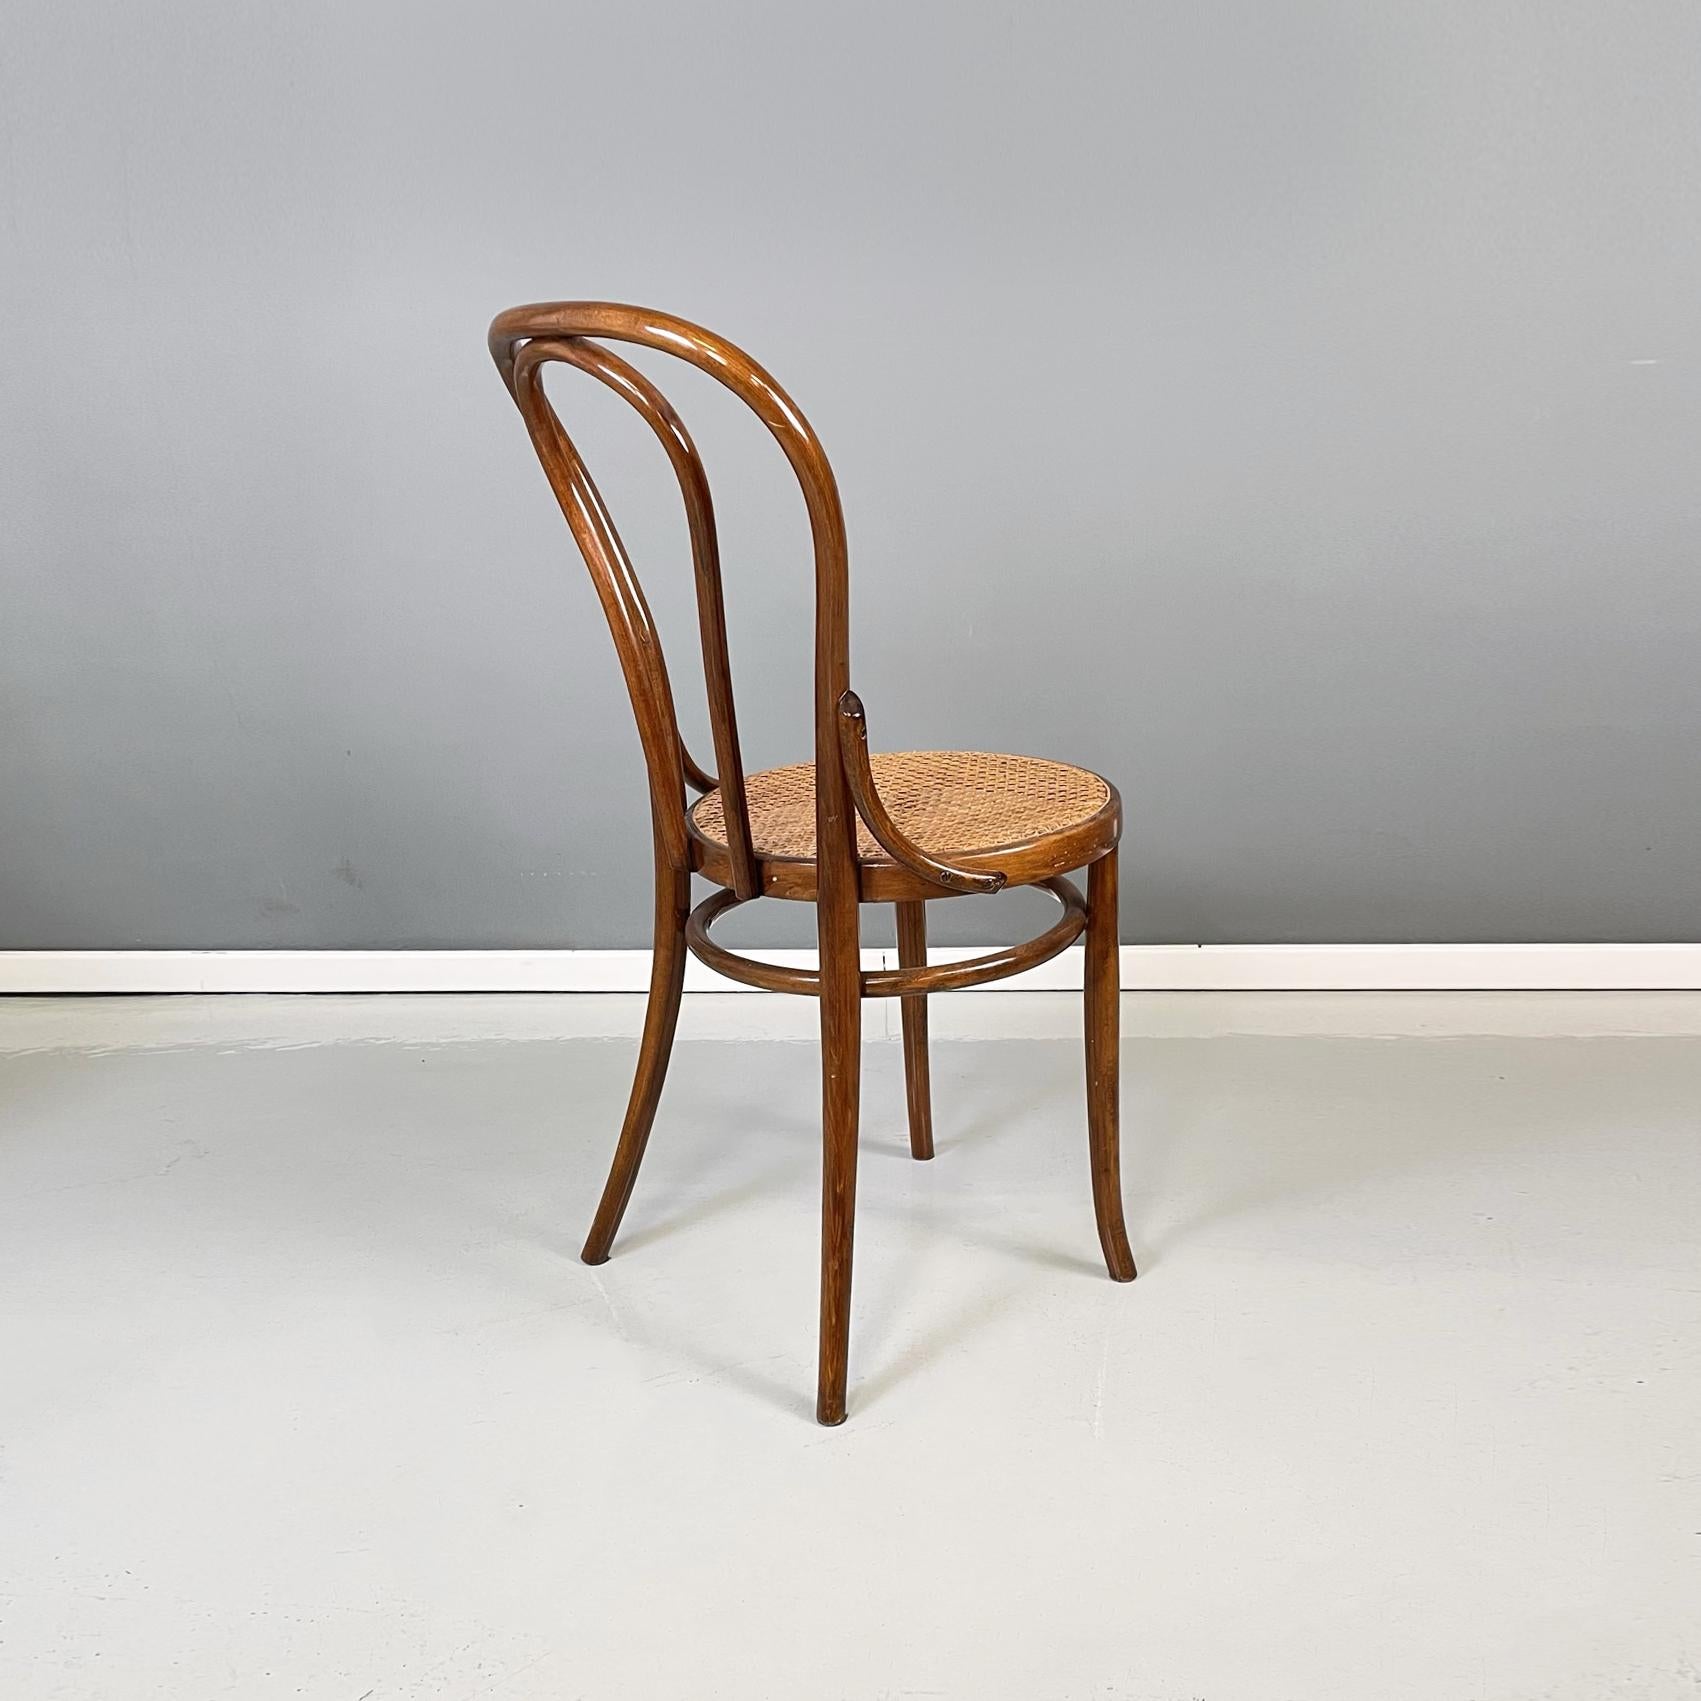 20th Century Austrian Chairs Thonet style with Straw and Wood by Salvatore Leone, 1900s For Sale